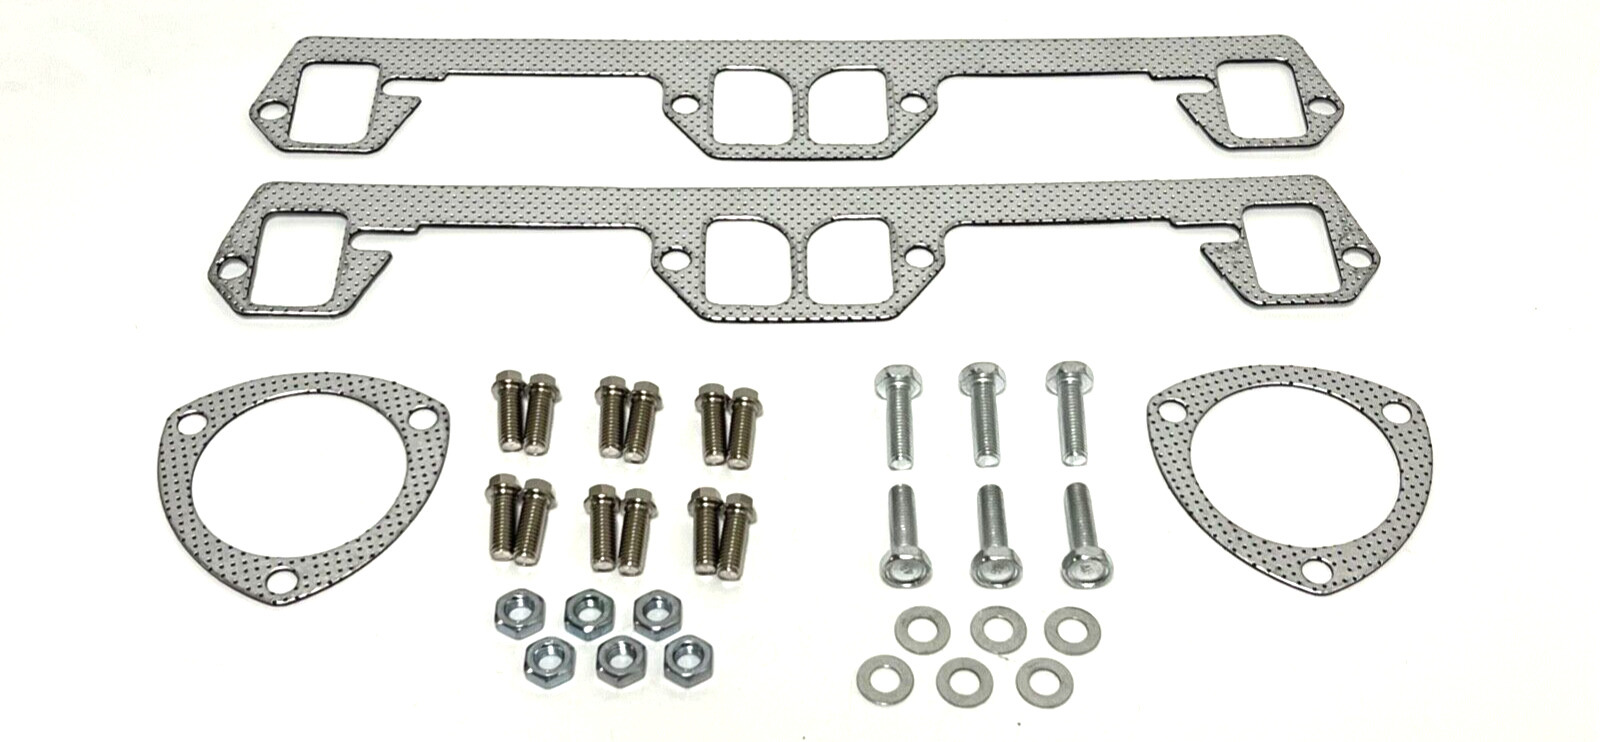 Exhaust Manifold Header Gaskets +Bolts Kit Fits 5.2 5.9 318 340 360 Engines